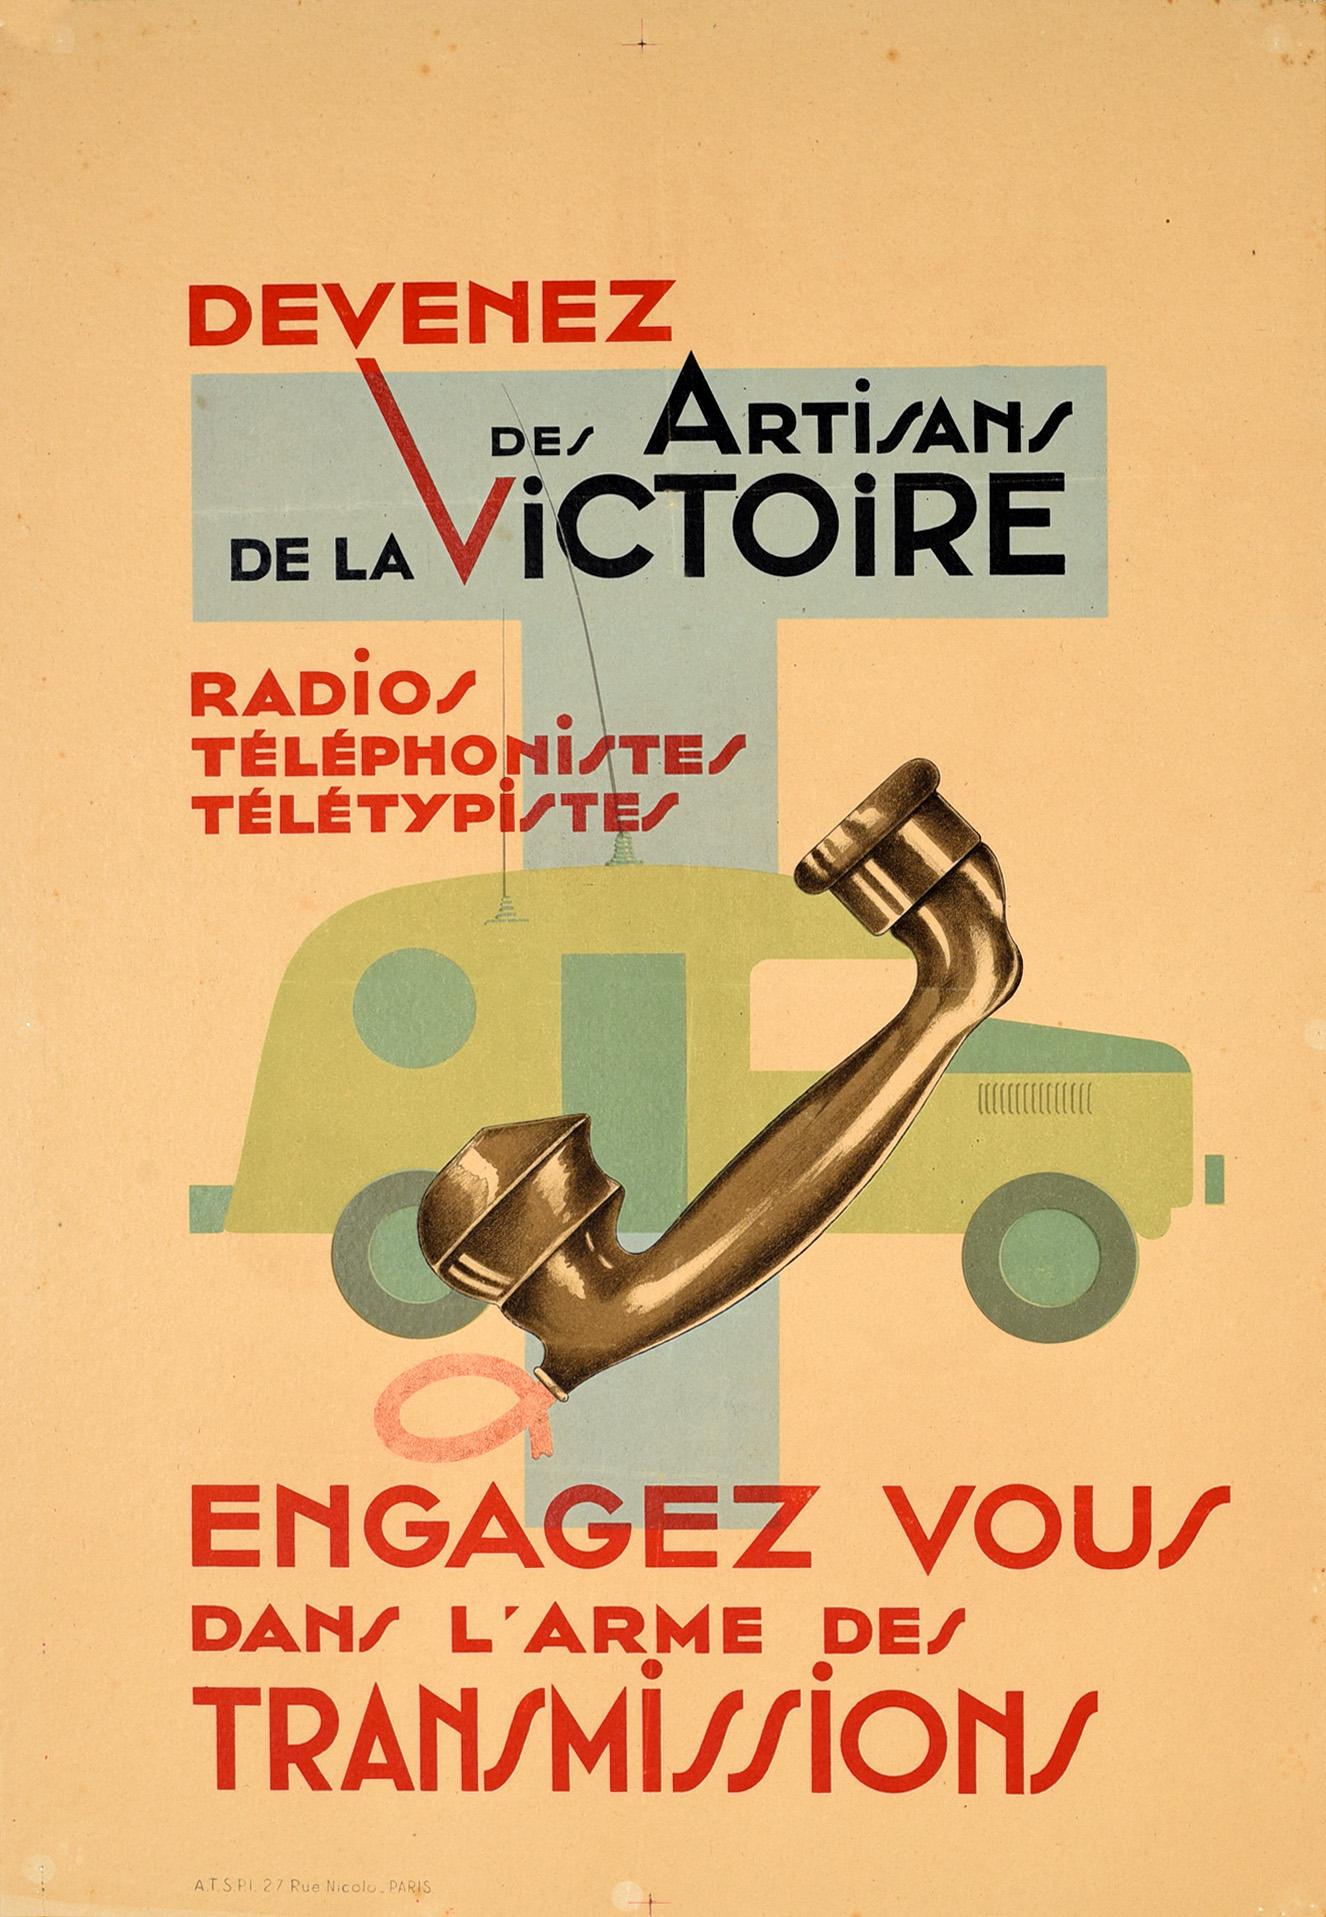 Unknown Print - Original Vintage Poster French Army Signal Corps Radio Telephone Communications